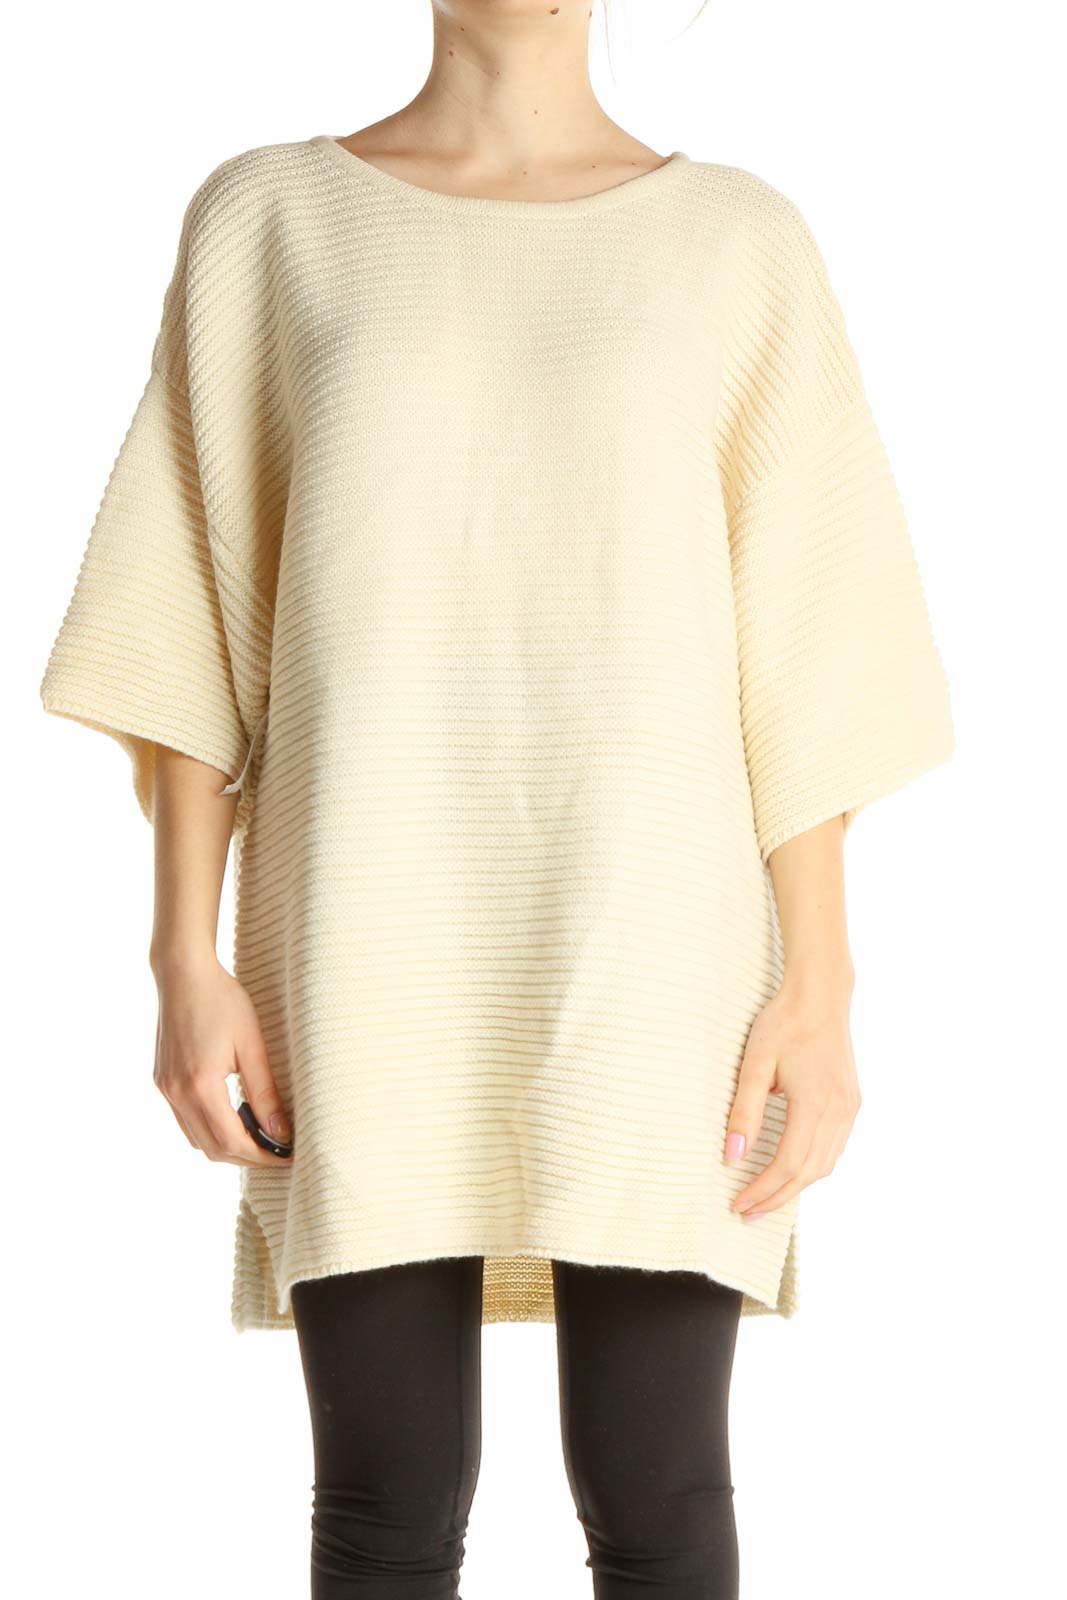 Beige Solid Classic Sweater Front